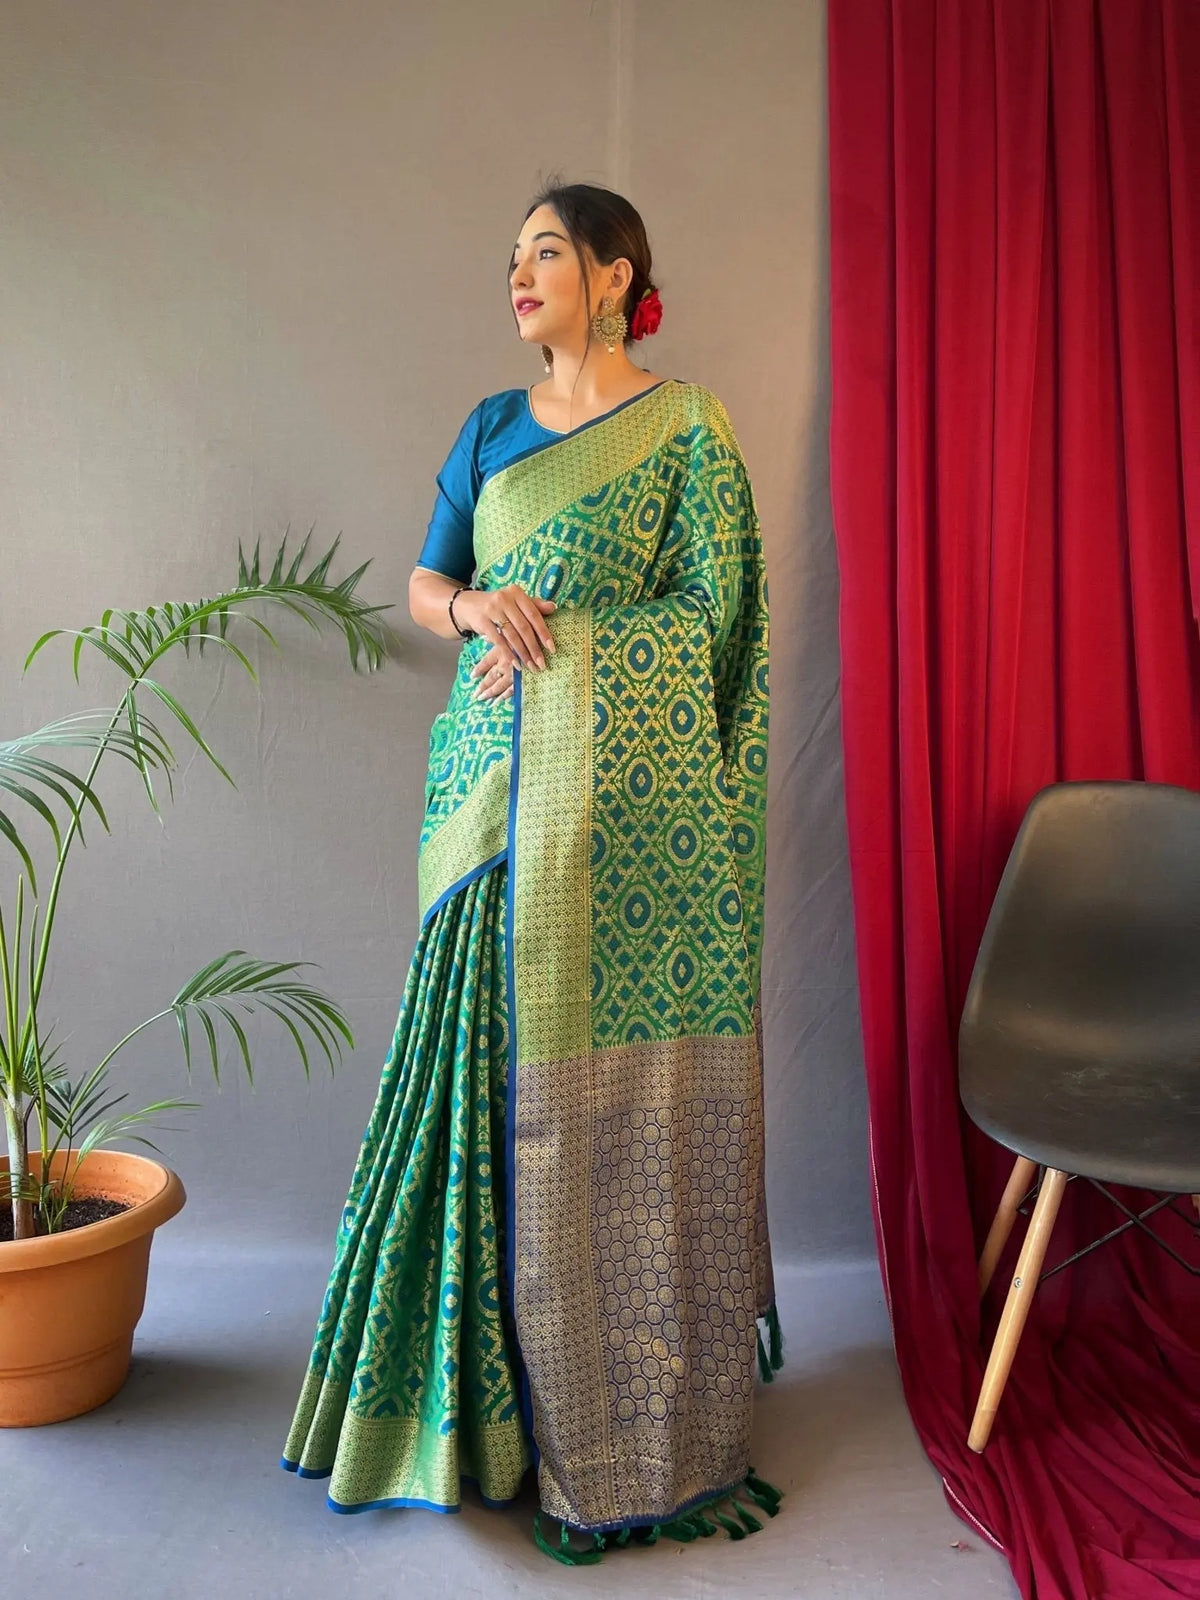 Patola Silk Woven Vol. 5 Contrast Green with Blue - Colorful Saree